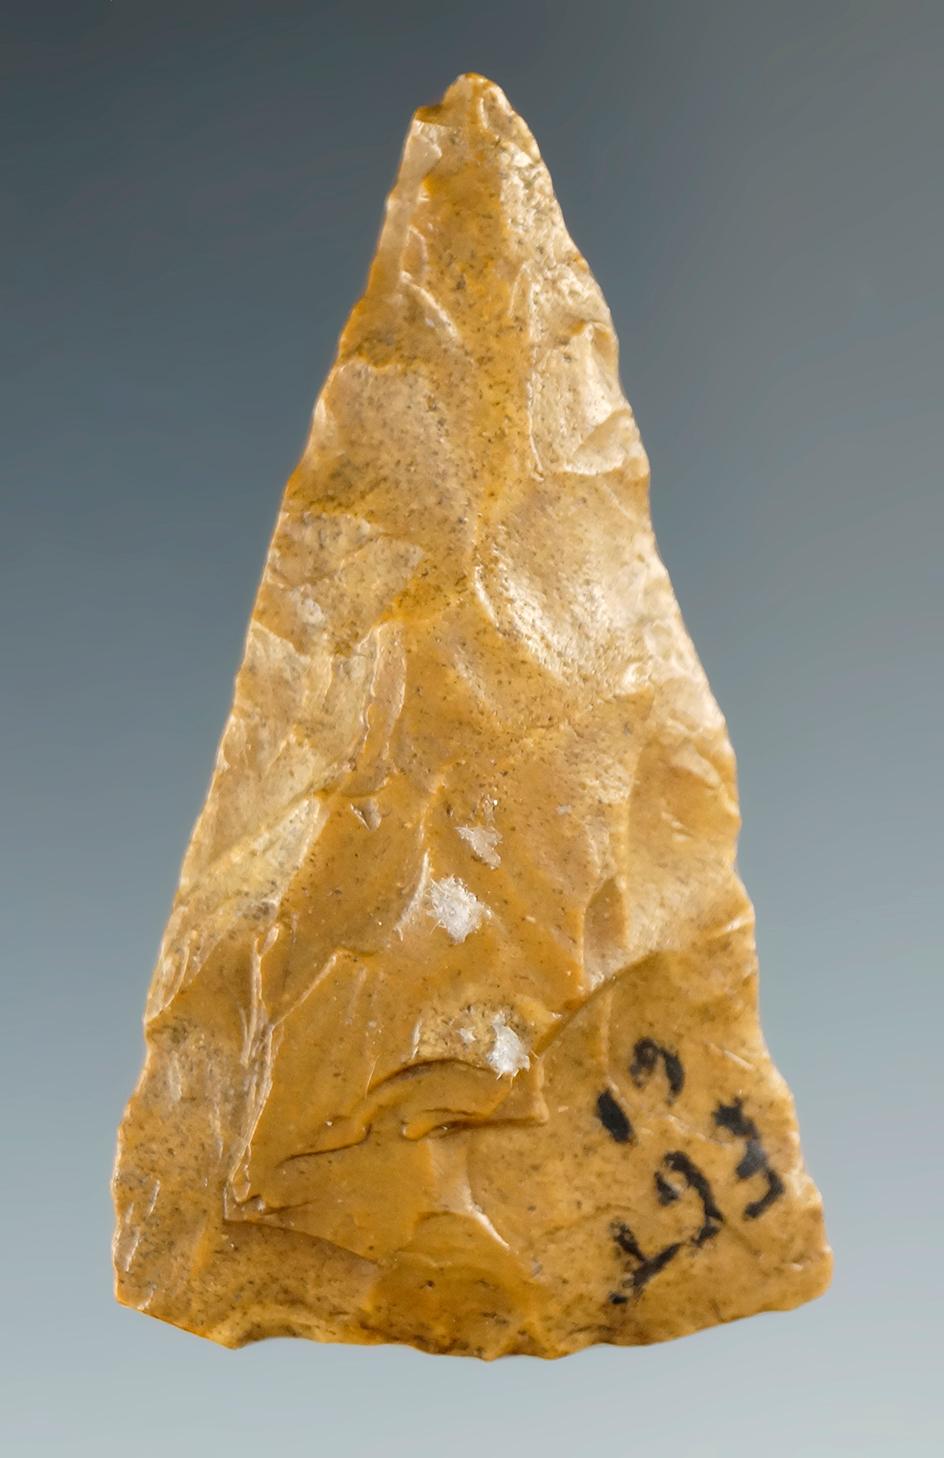 Well flaked 2" Triangular Projectile Point found in Kom Ombo, Egypt. 40,000 BP.